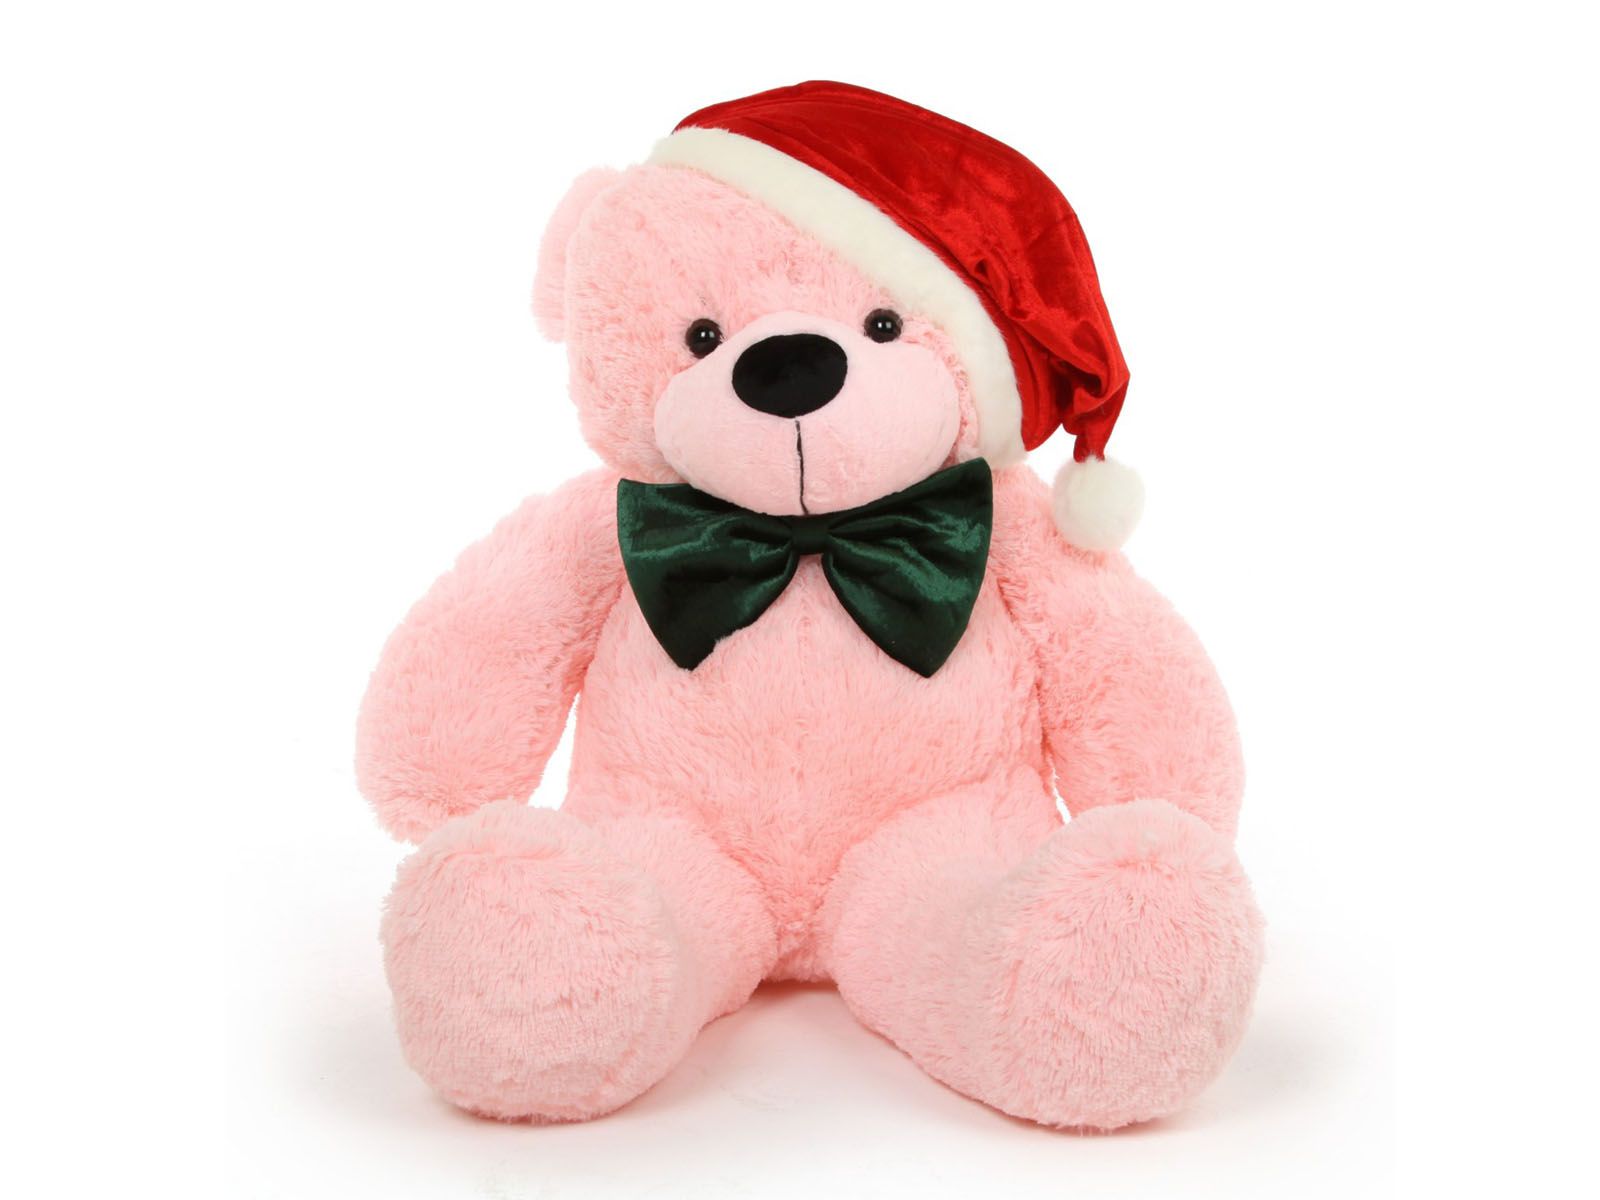 Free download Christmas Teddy Bear Wallpaper Image Photo and Picture for [1600x1200] for your Desktop, Mobile & Tablet. Explore Free Teddy Bear Wallpaper. Cute Teddy Bear Wallpaper, Teddy Bear